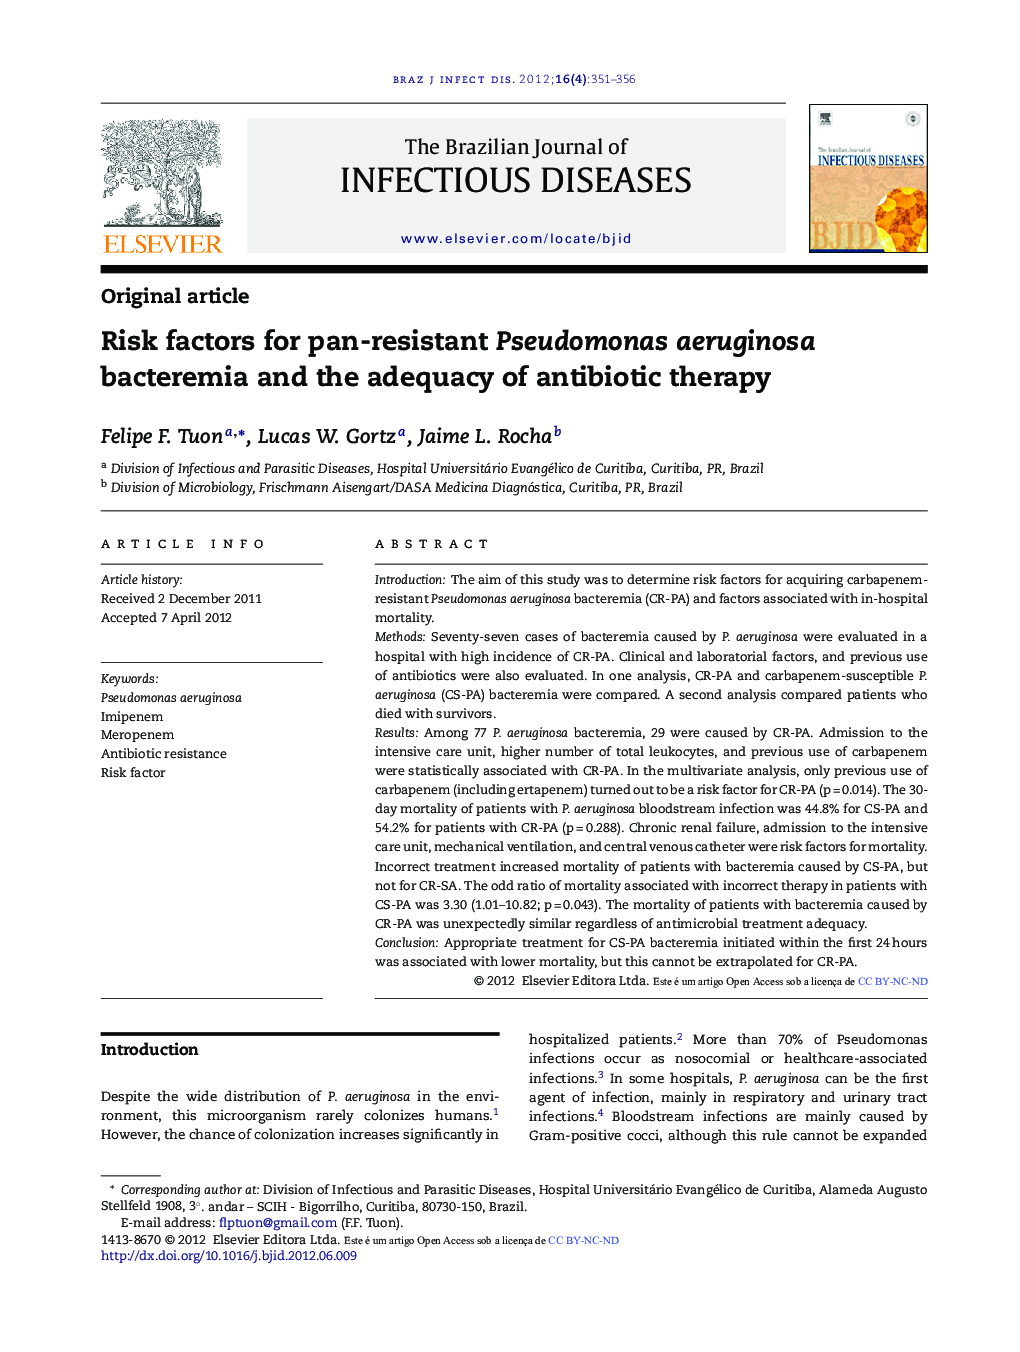 Risk factors for pan-resistant Pseudomonas aeruginosa bacteremia and the adequacy of antibiotic therapy